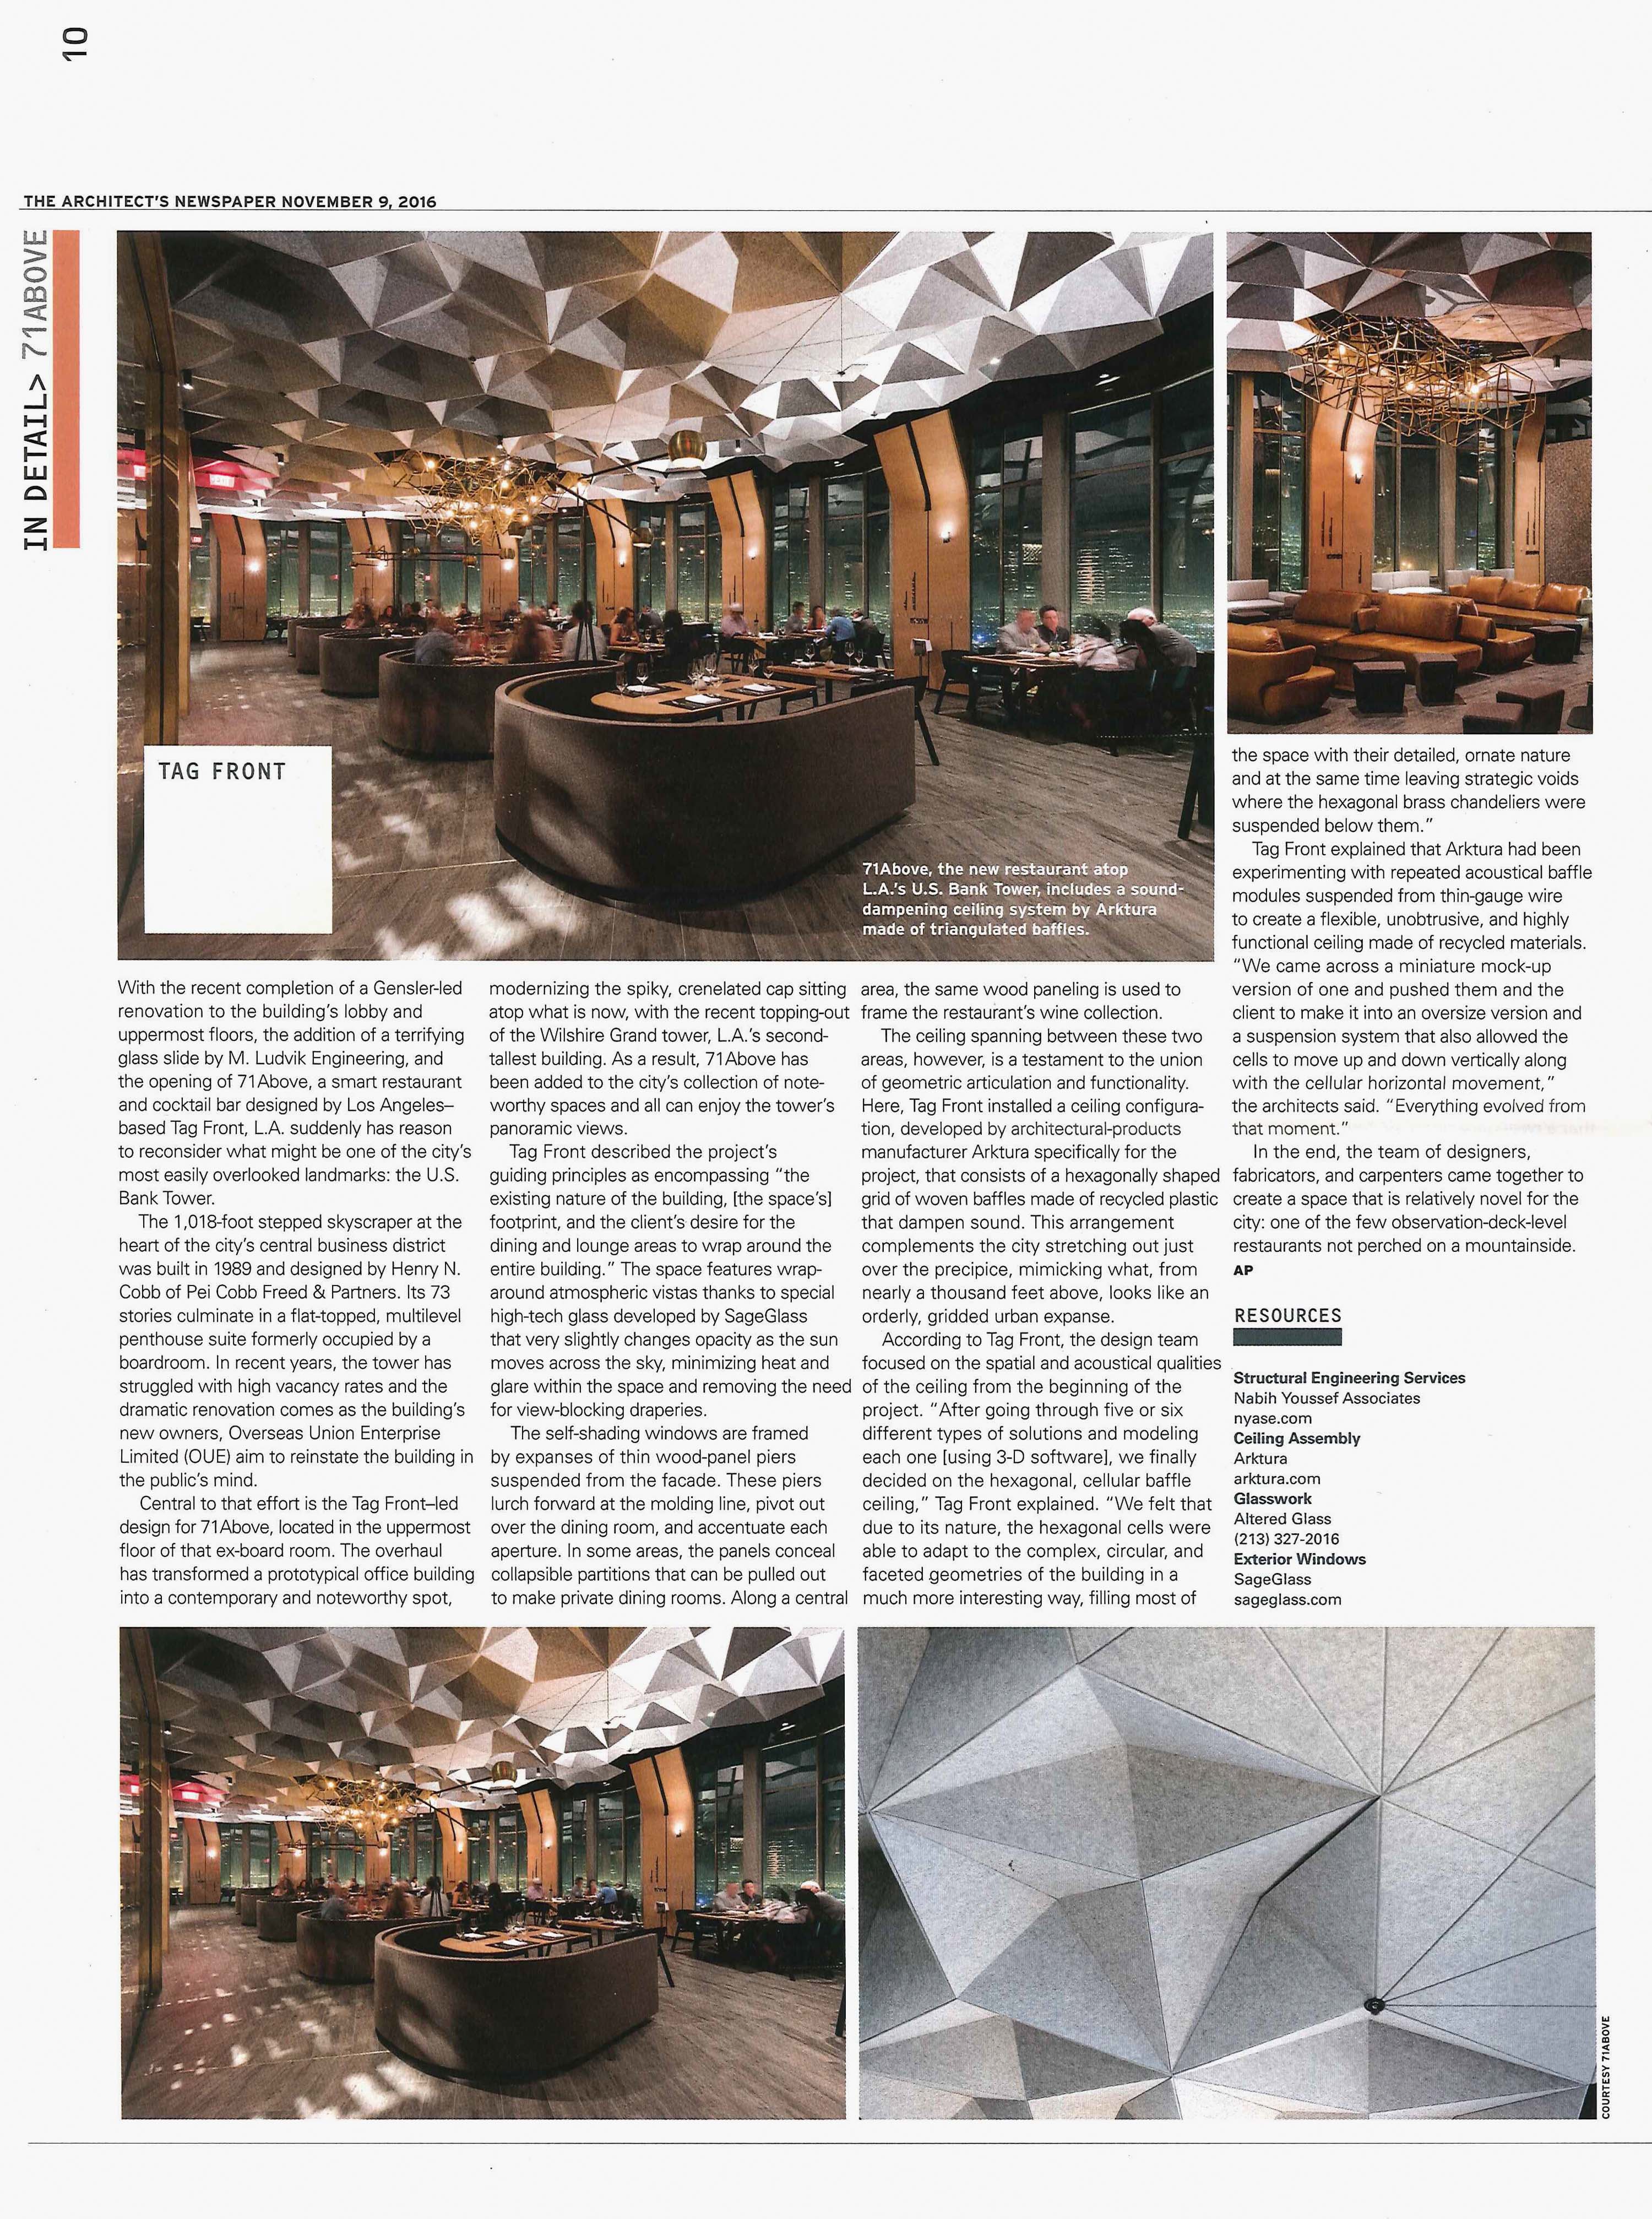 Architects-Newspaper-November-2016-71Above-Images-Article